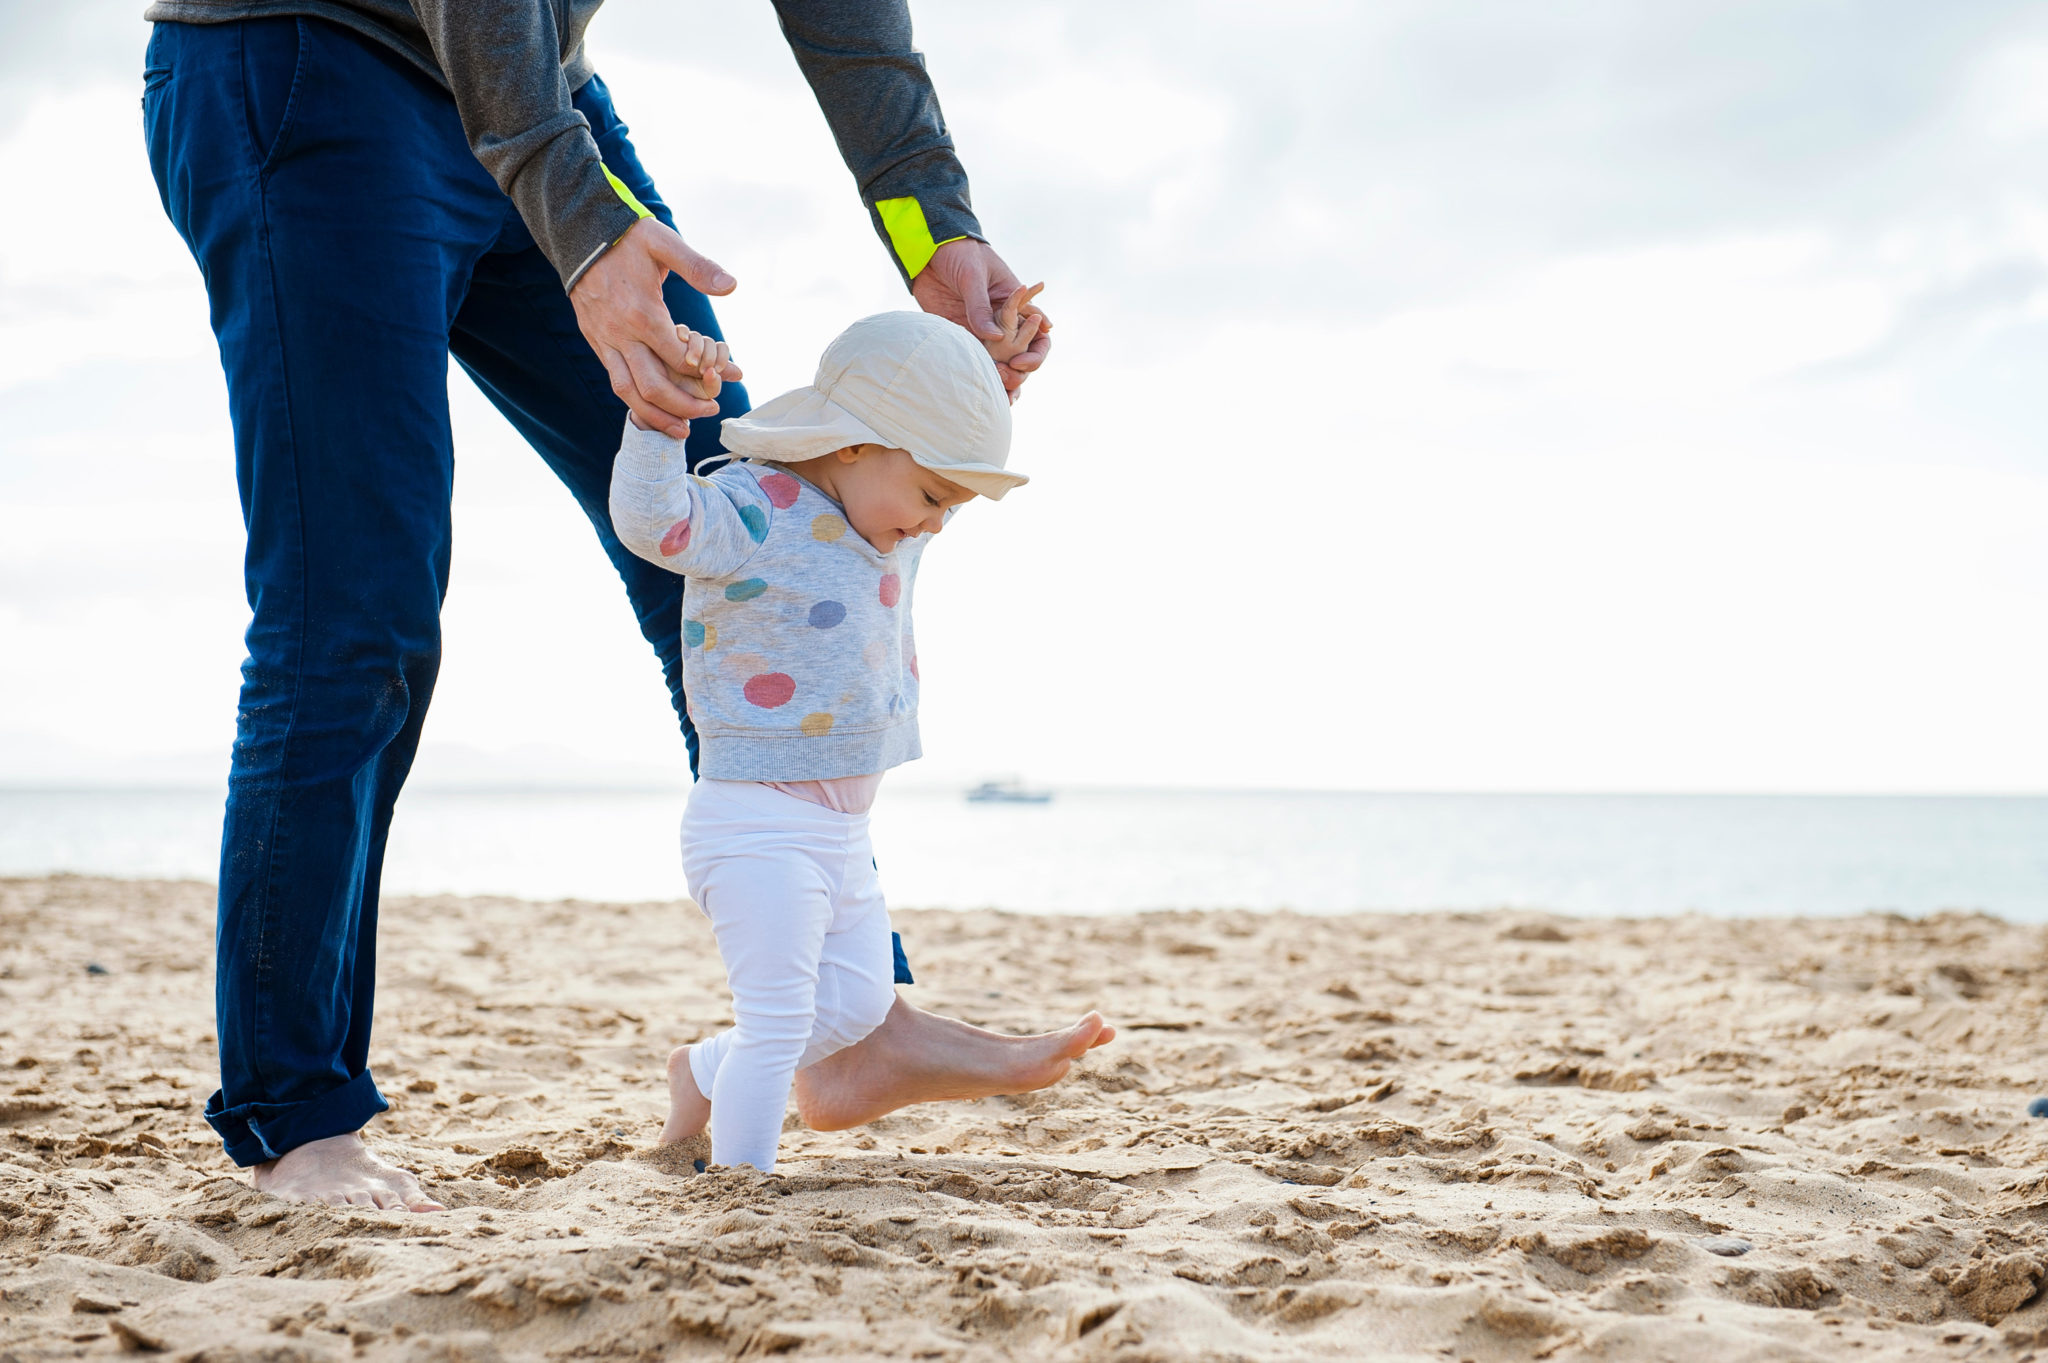 A baby girl walking on the beach with the help of her father. Image: Westend61 GmbH / Alamy Stock Photo